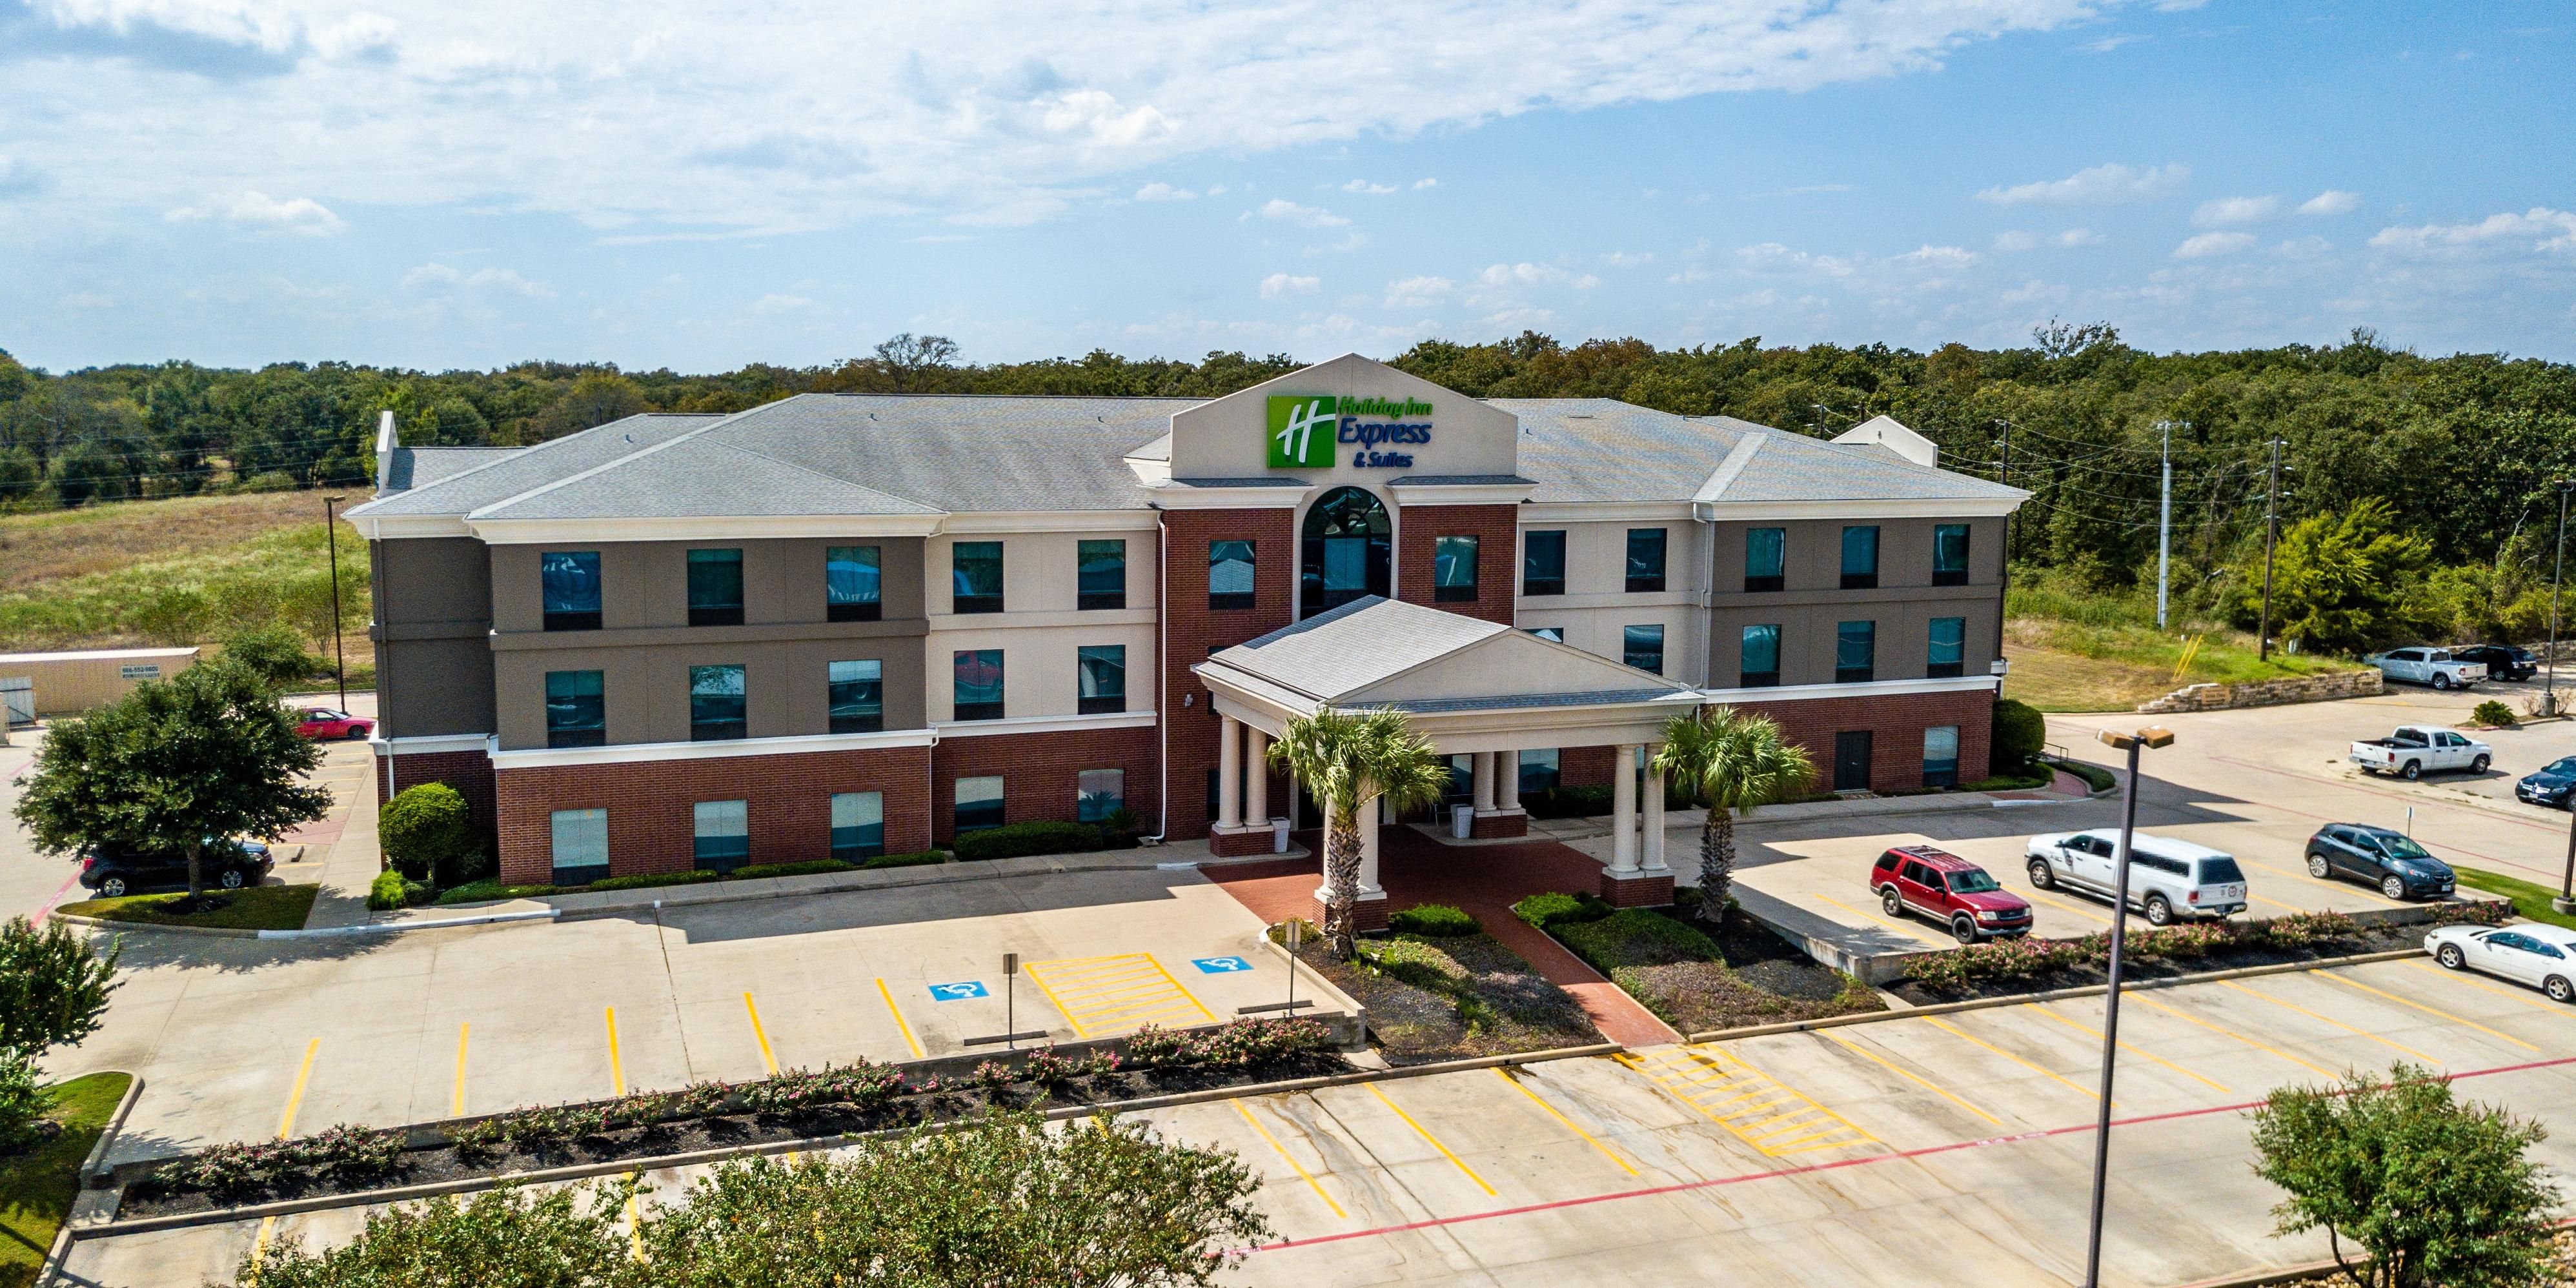 We provide a hot breakfast and comfortable beds to ensure your teams are ready for their big games. Our hotel is a short drive from Franklin Ranch ball fields and we would love to discuss our availability for your sports team needs.